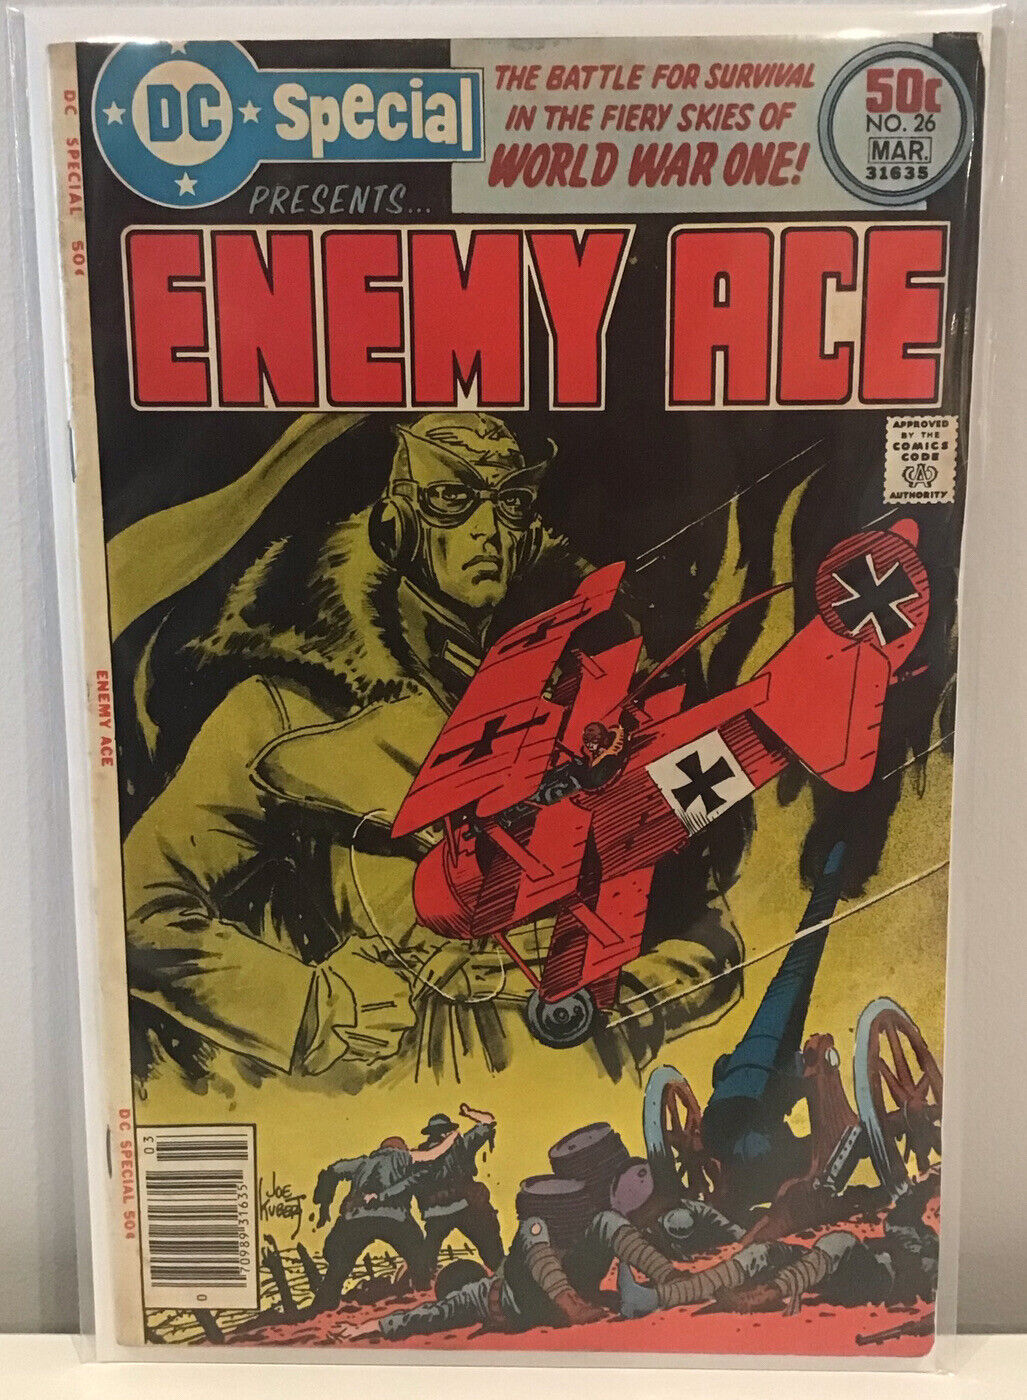 DC SPECIAL  #26 Presents: Enemy Ace. High-grade Bronze Age Comic 1977 50¢ Giant